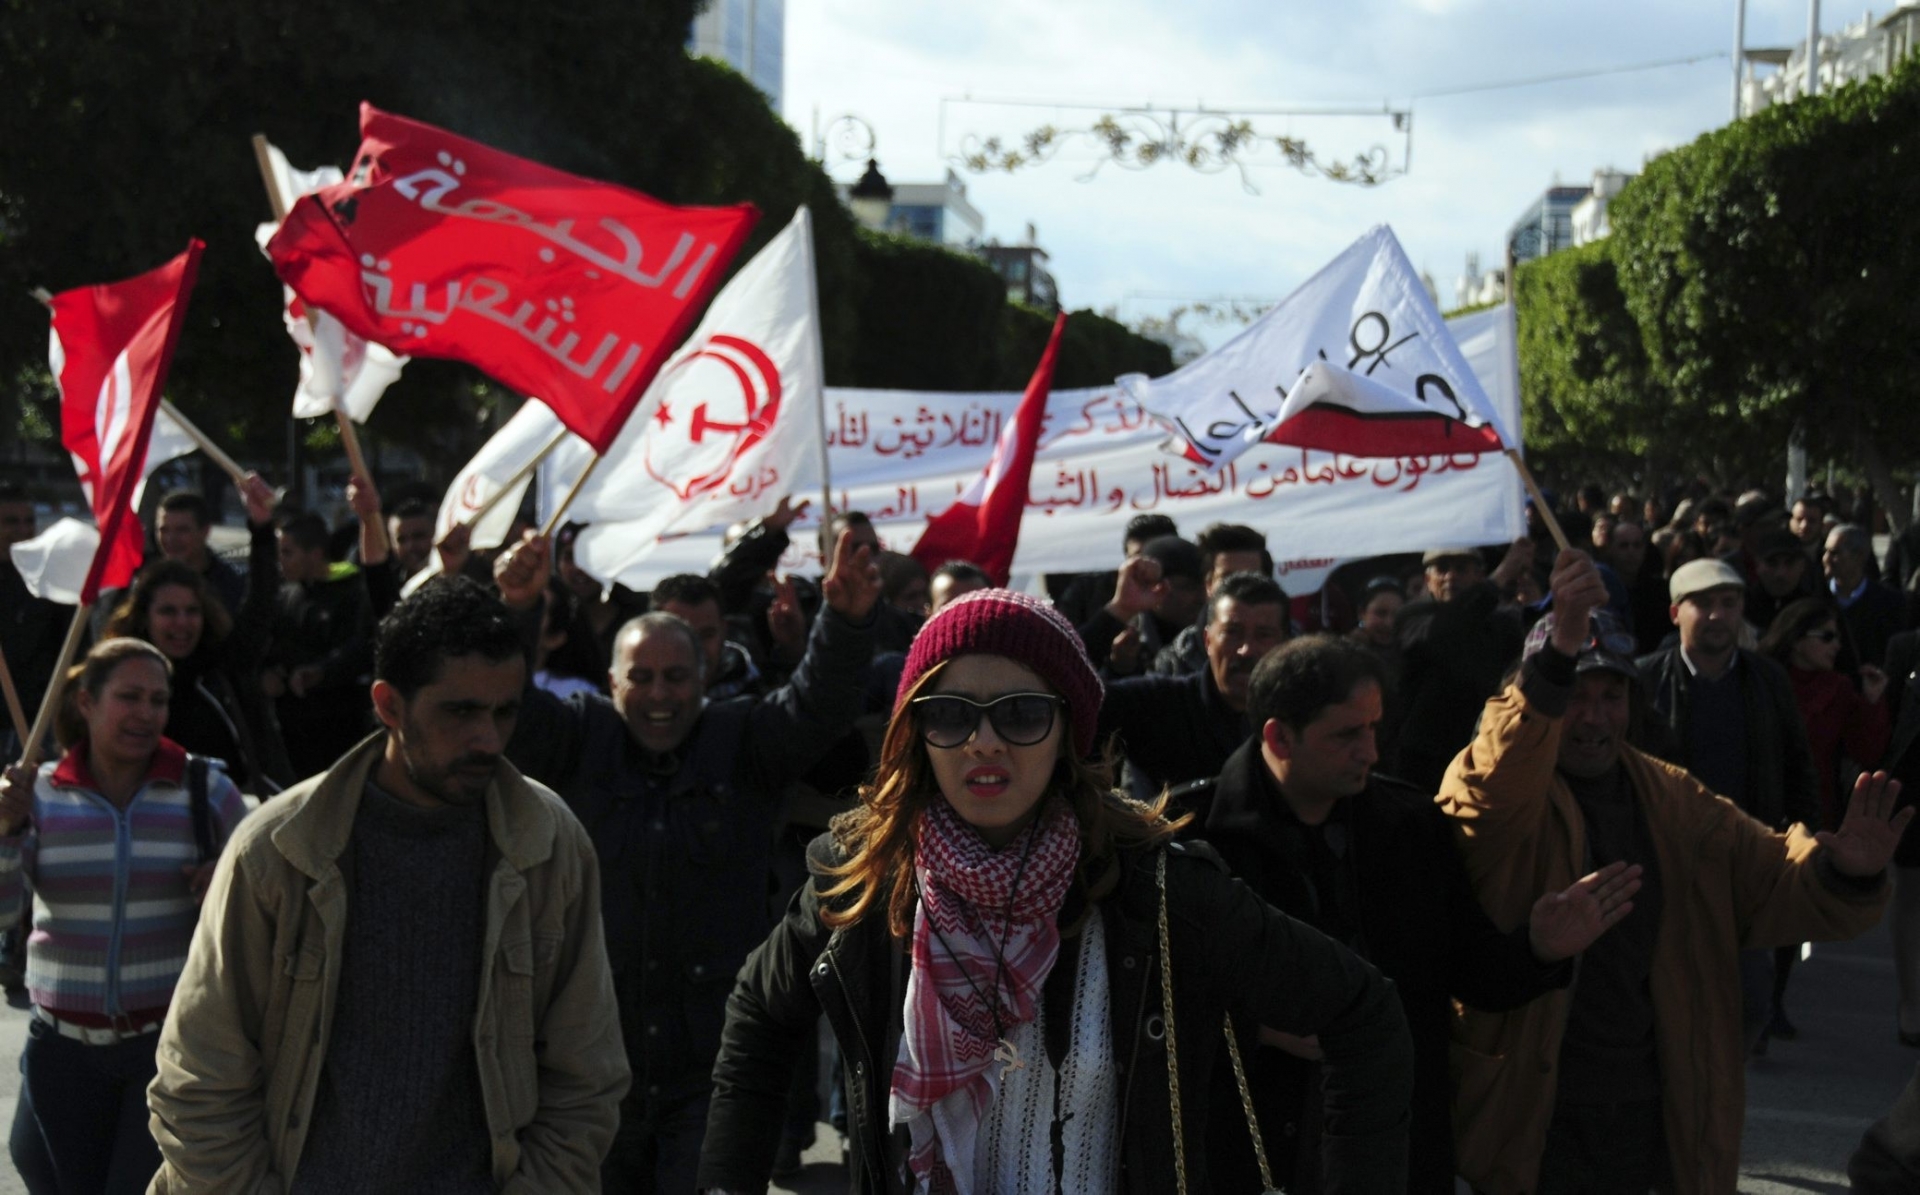 Unemployed tunisian people stage a protest in a precarious calm enforced by a nationwide curfew in Habib Bourguiba avenue, center downtown of Tunis, Saturday Jan. 23, 2016.  Tunisia's president vowed Friday to end the cycle of unrest that has pummeled towns across the country as authorities imposed a nationwide curfew, five years after the nation, convulsed by protests, overthrew its longtime ruler and moved onto the road to democracy. (AP Photo/Riadh Dridi) TUNISIA